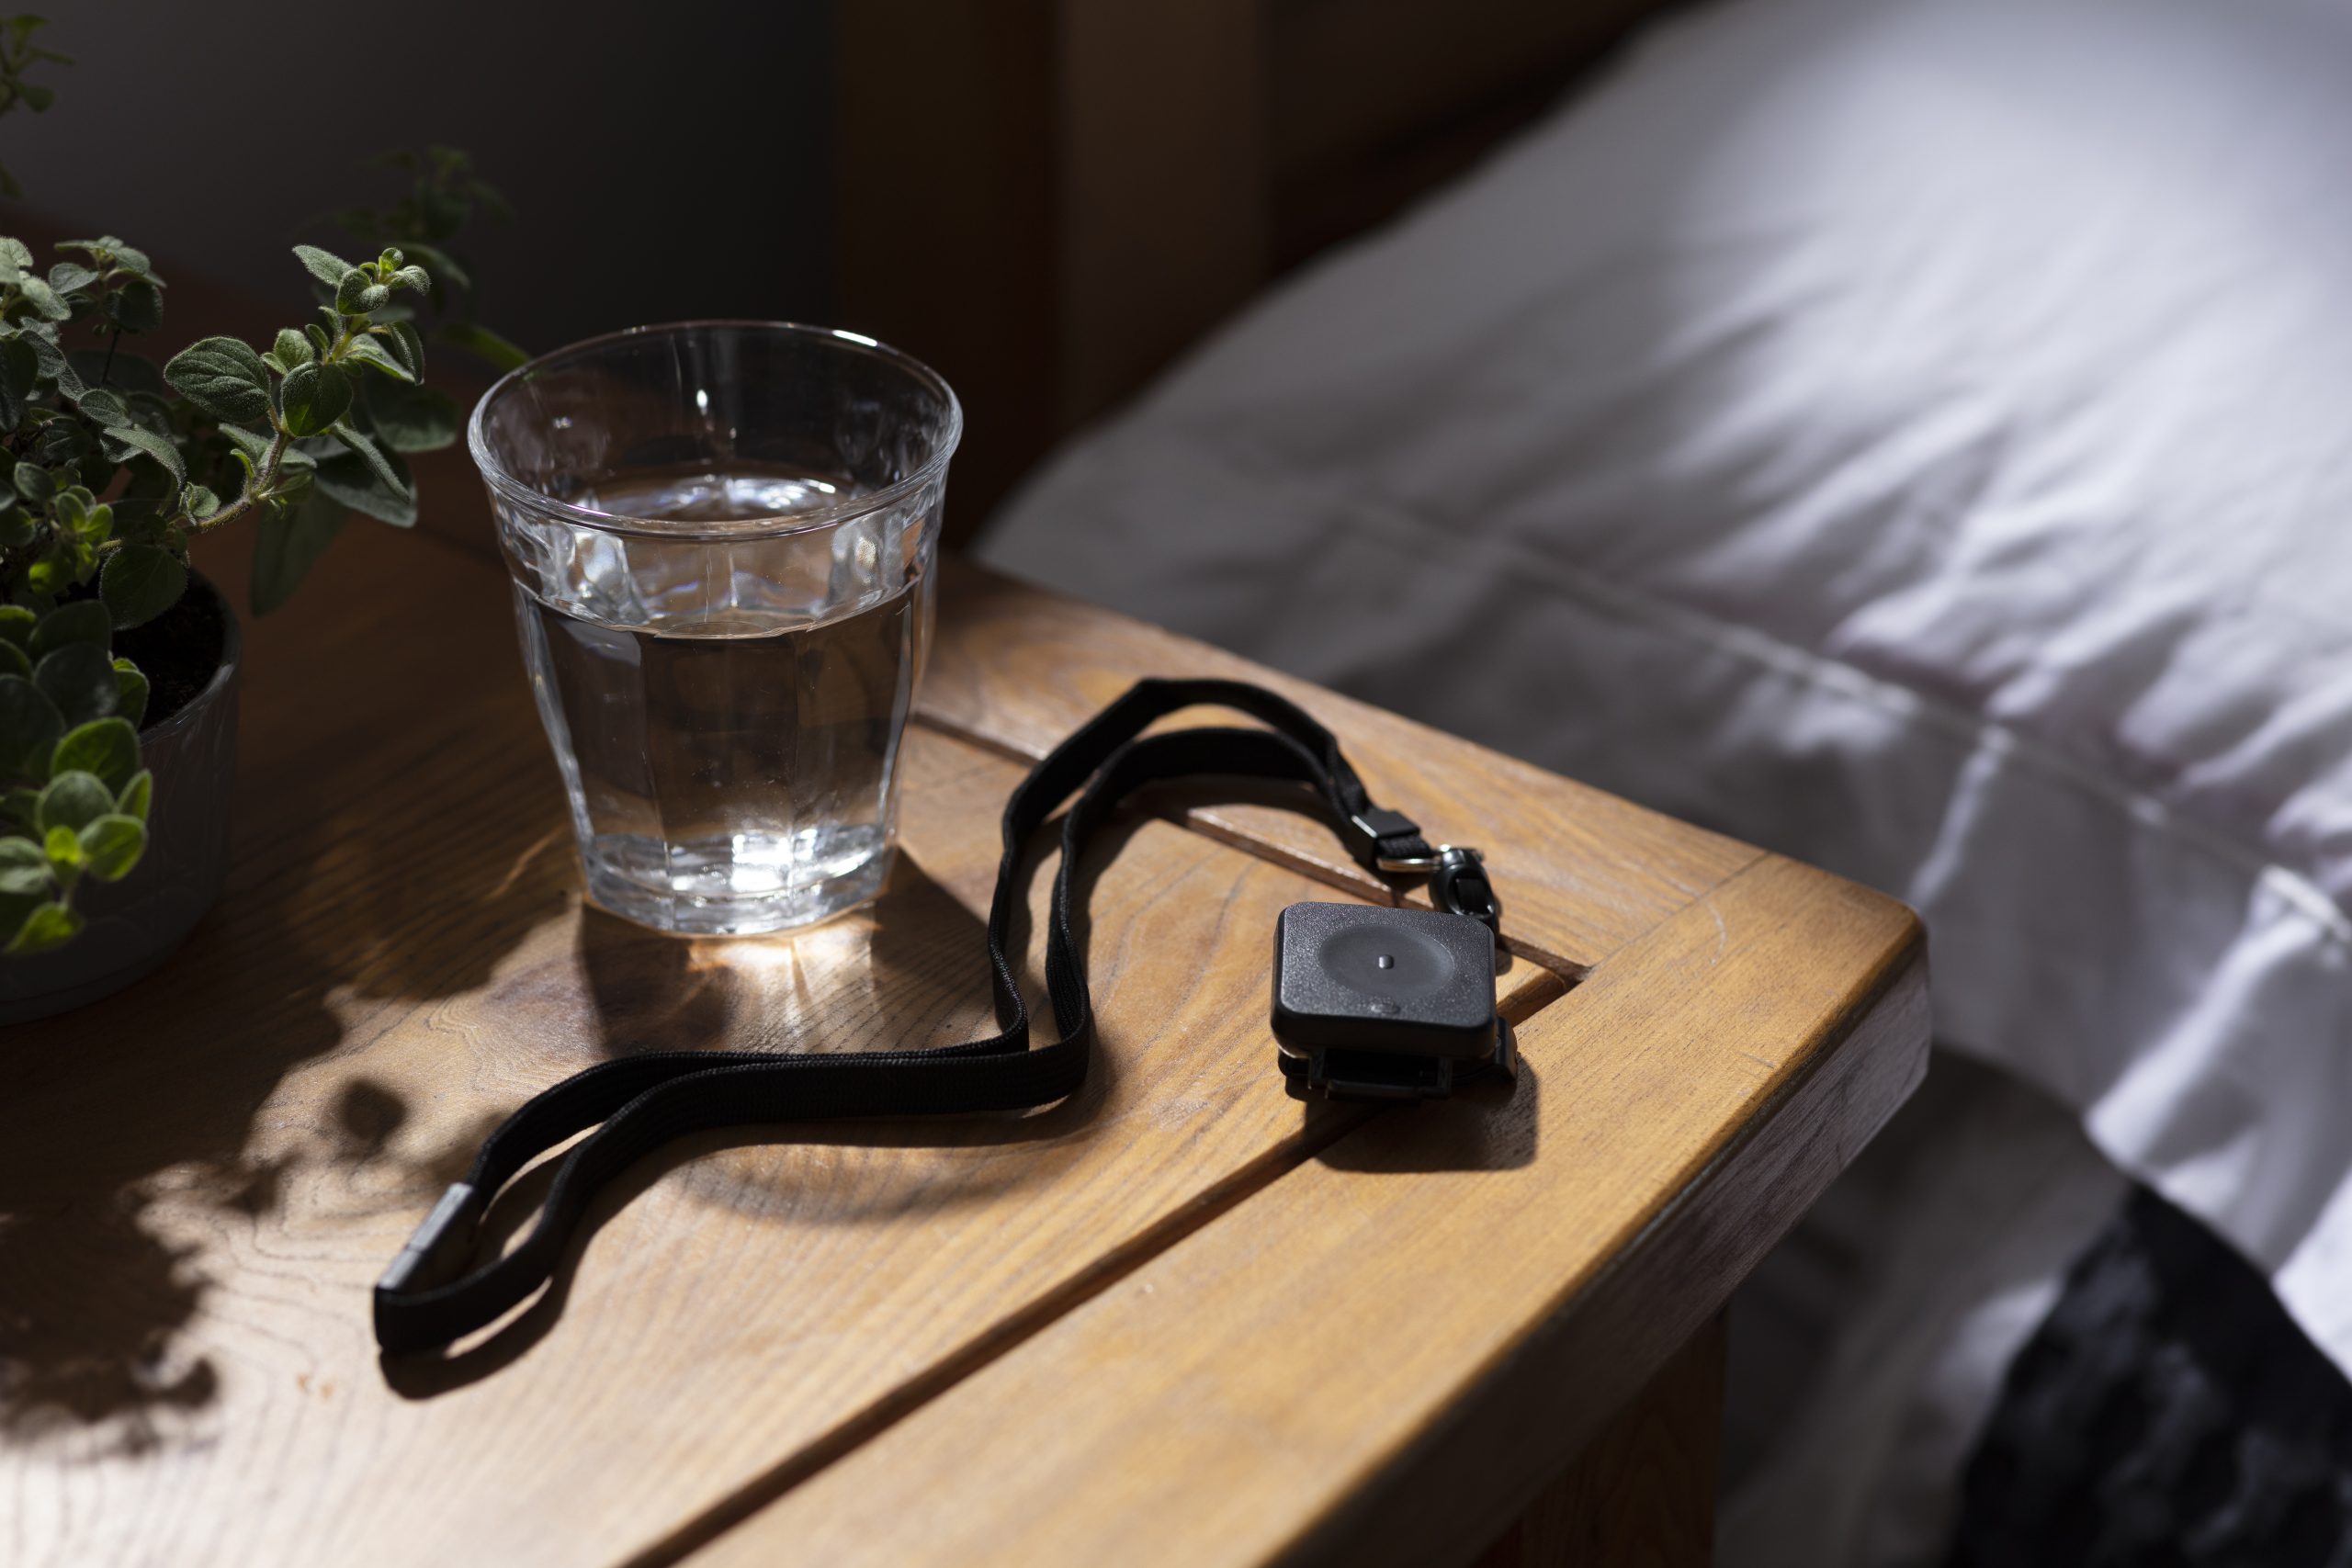 A medical alert pendant on a nightstand next to a glass of water.